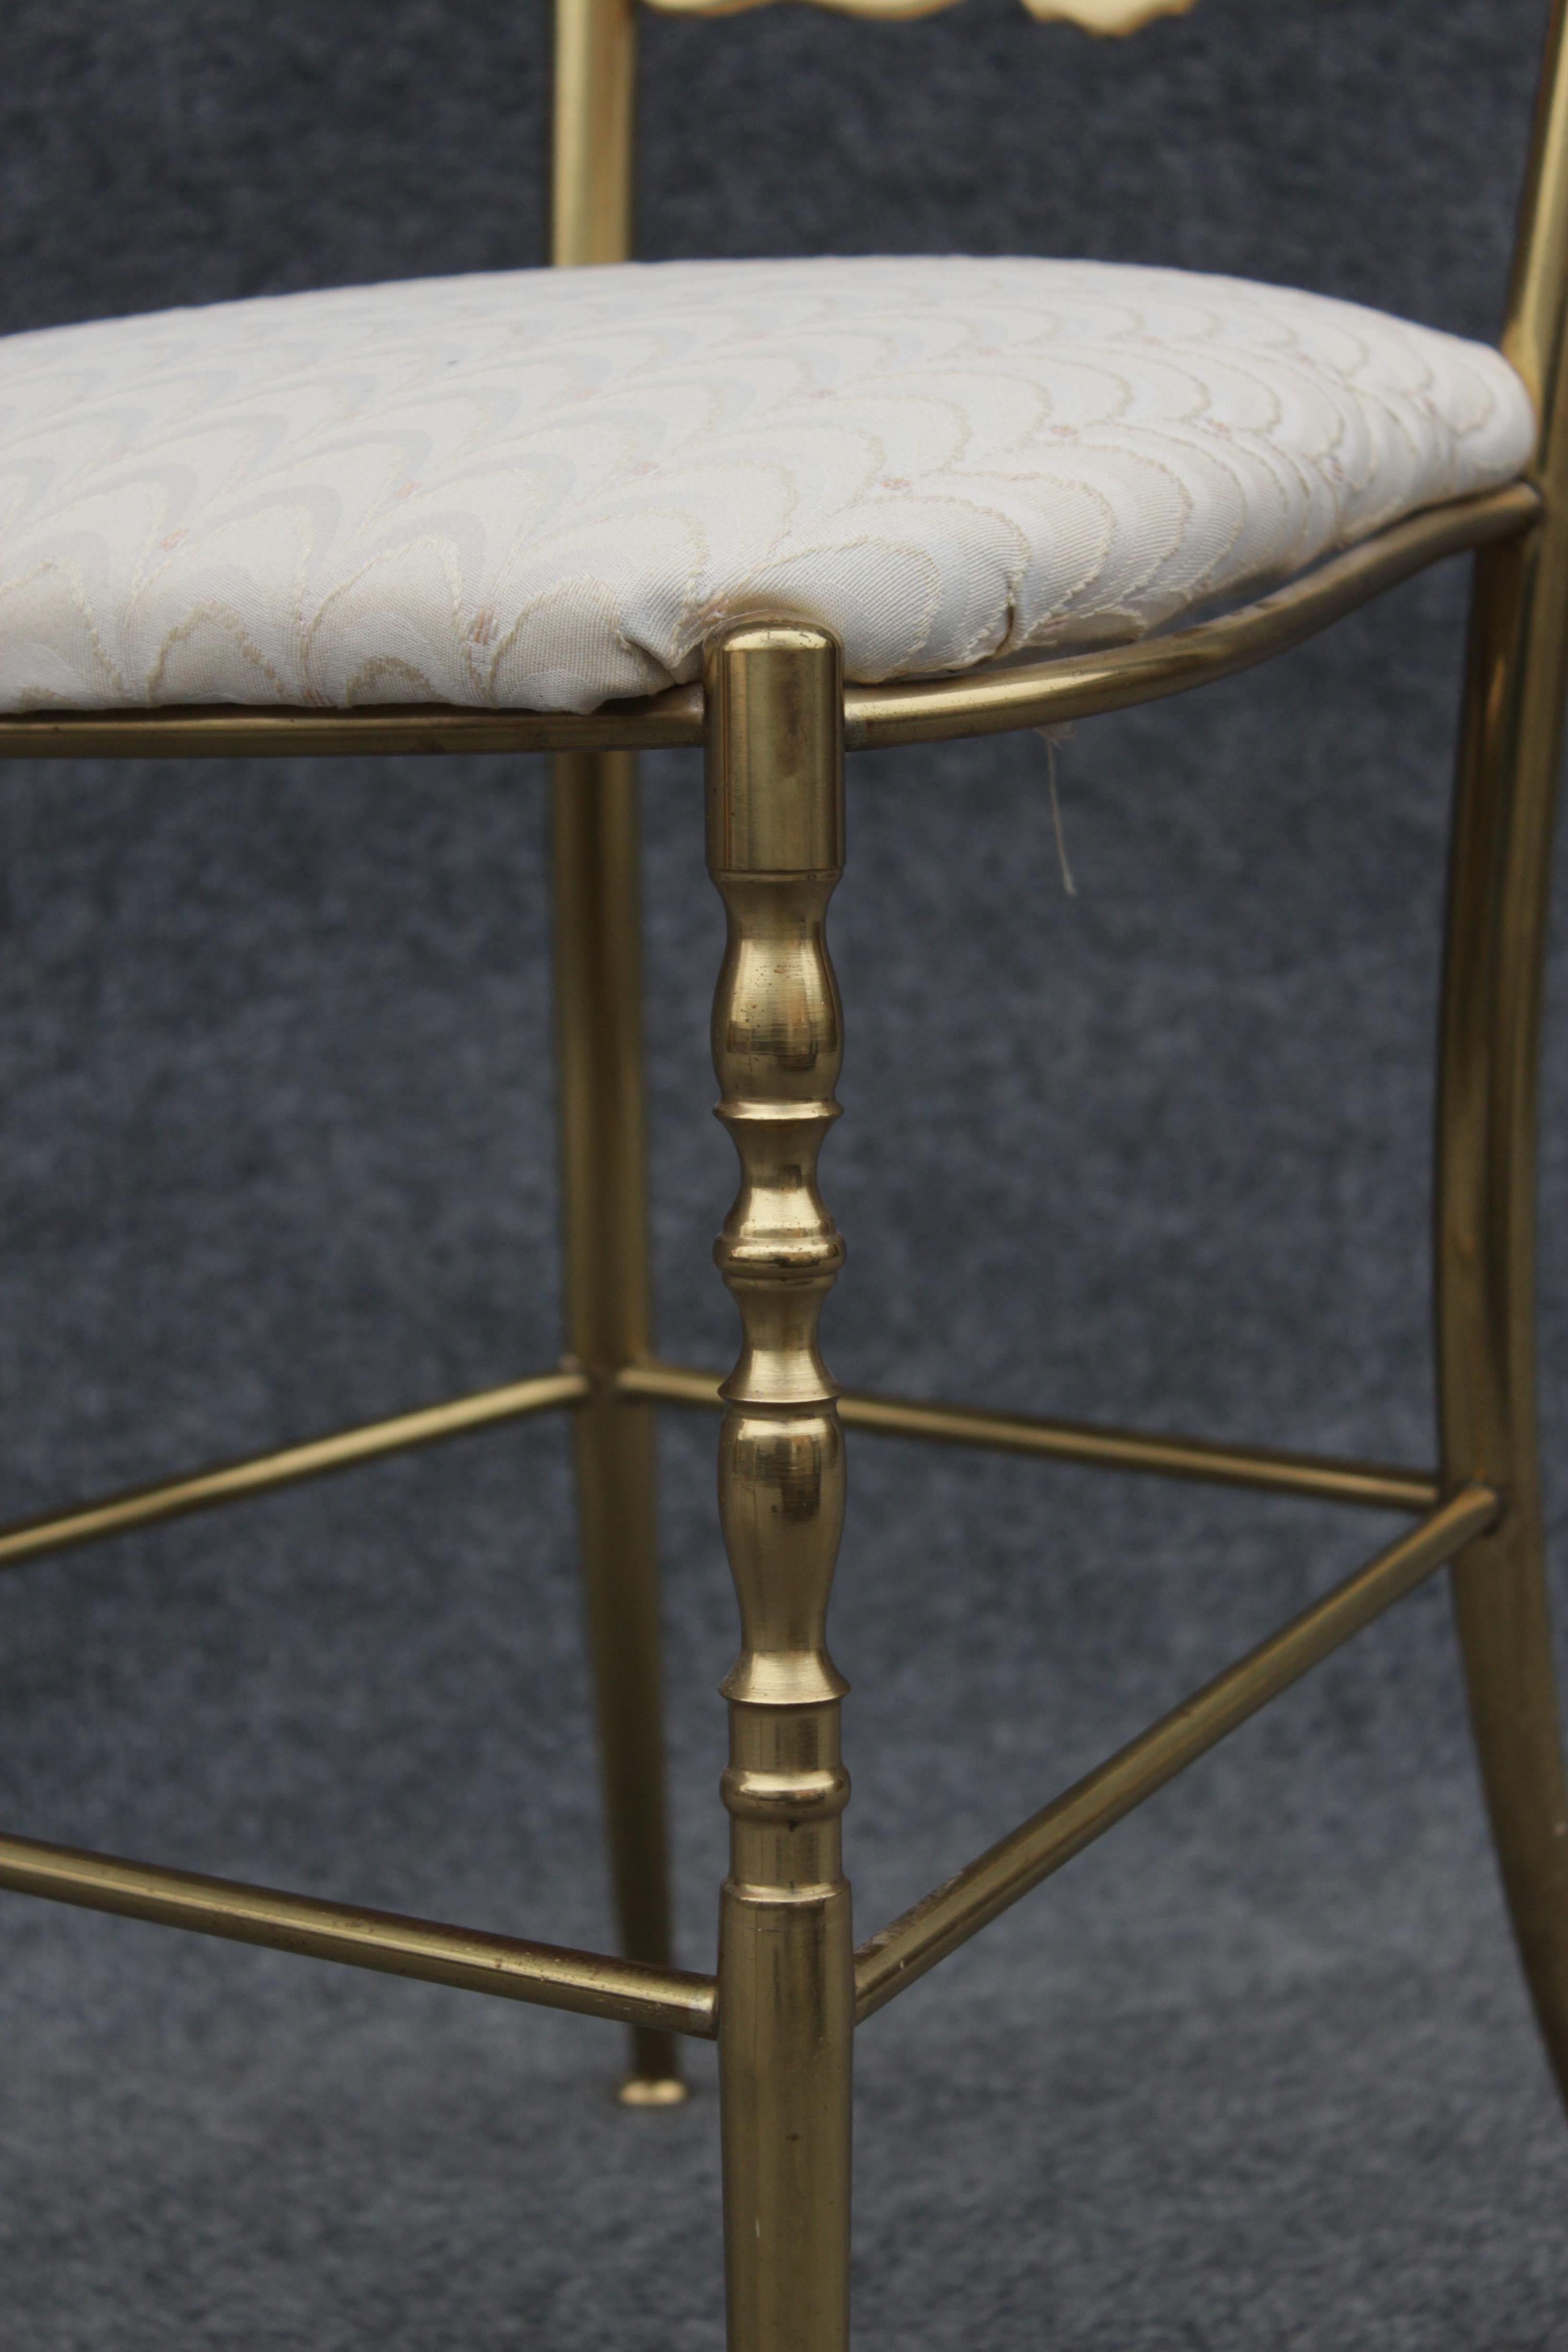 Pair of Solid Brass & White Upholstered Dining or Side Chairs by Chiavari Italy For Sale 9